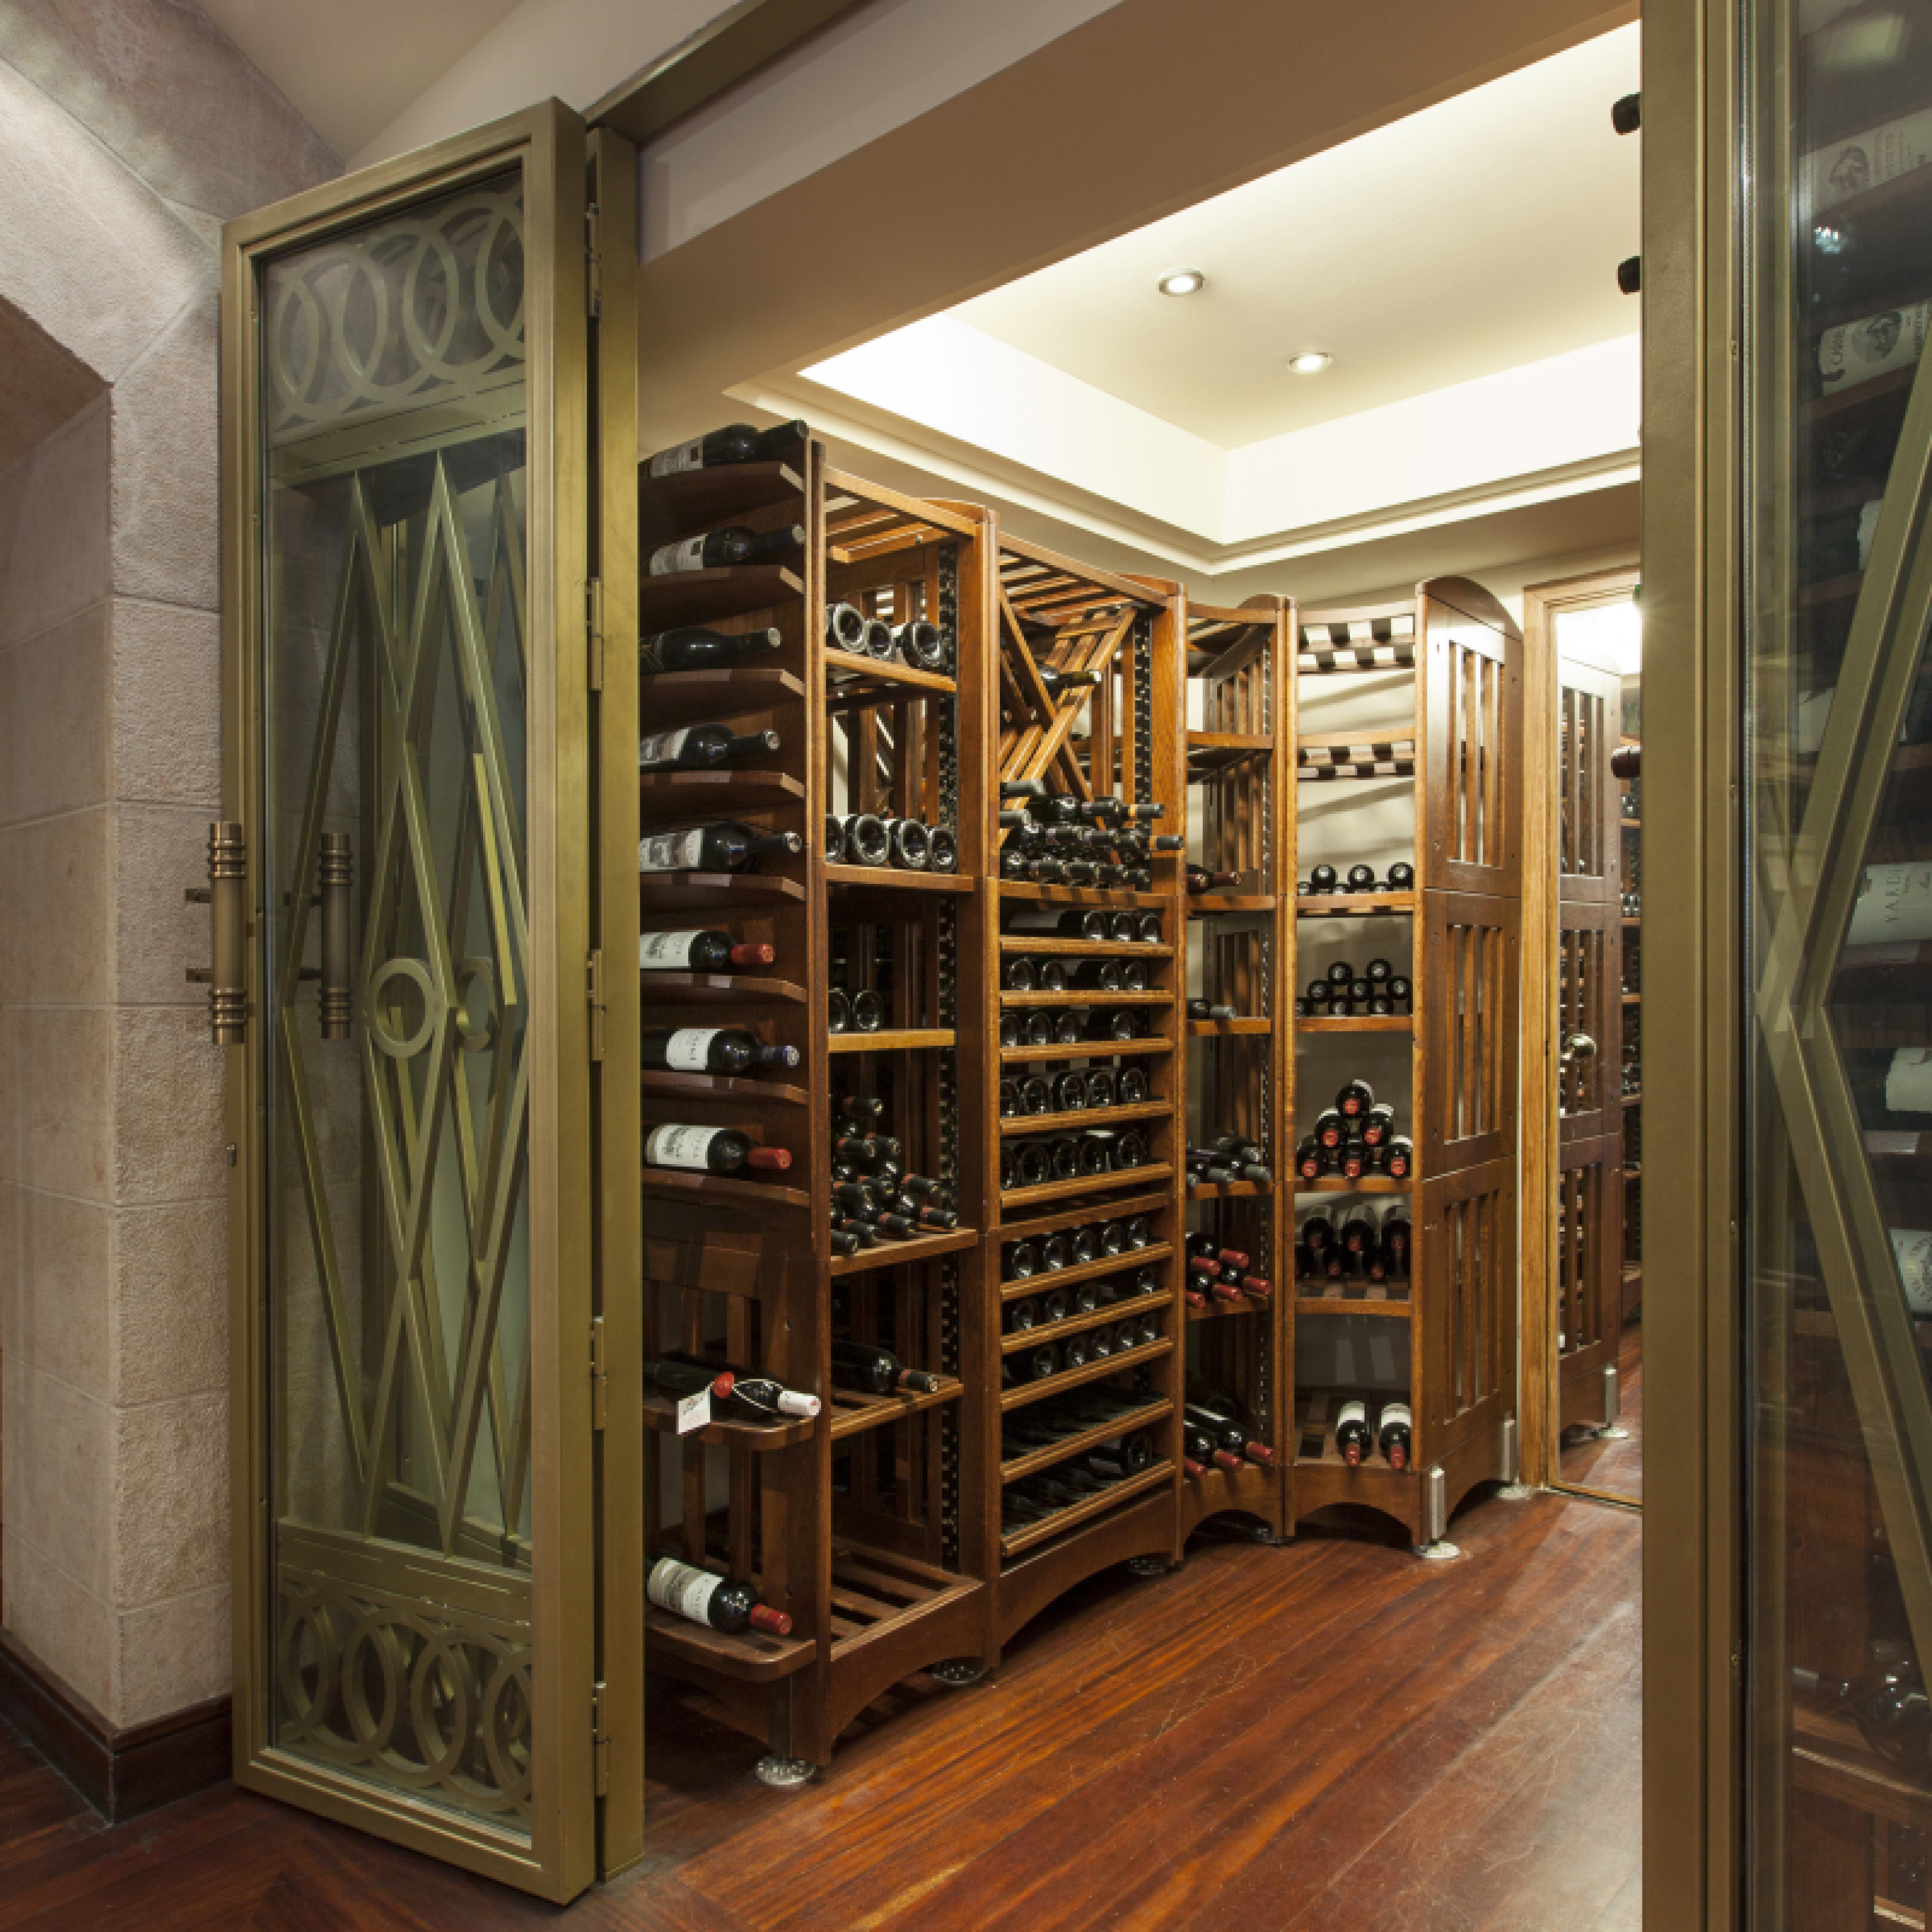 Interior design – traditional, authentic wine cellar with wooden units and different types of modular shelves - Modulothèque